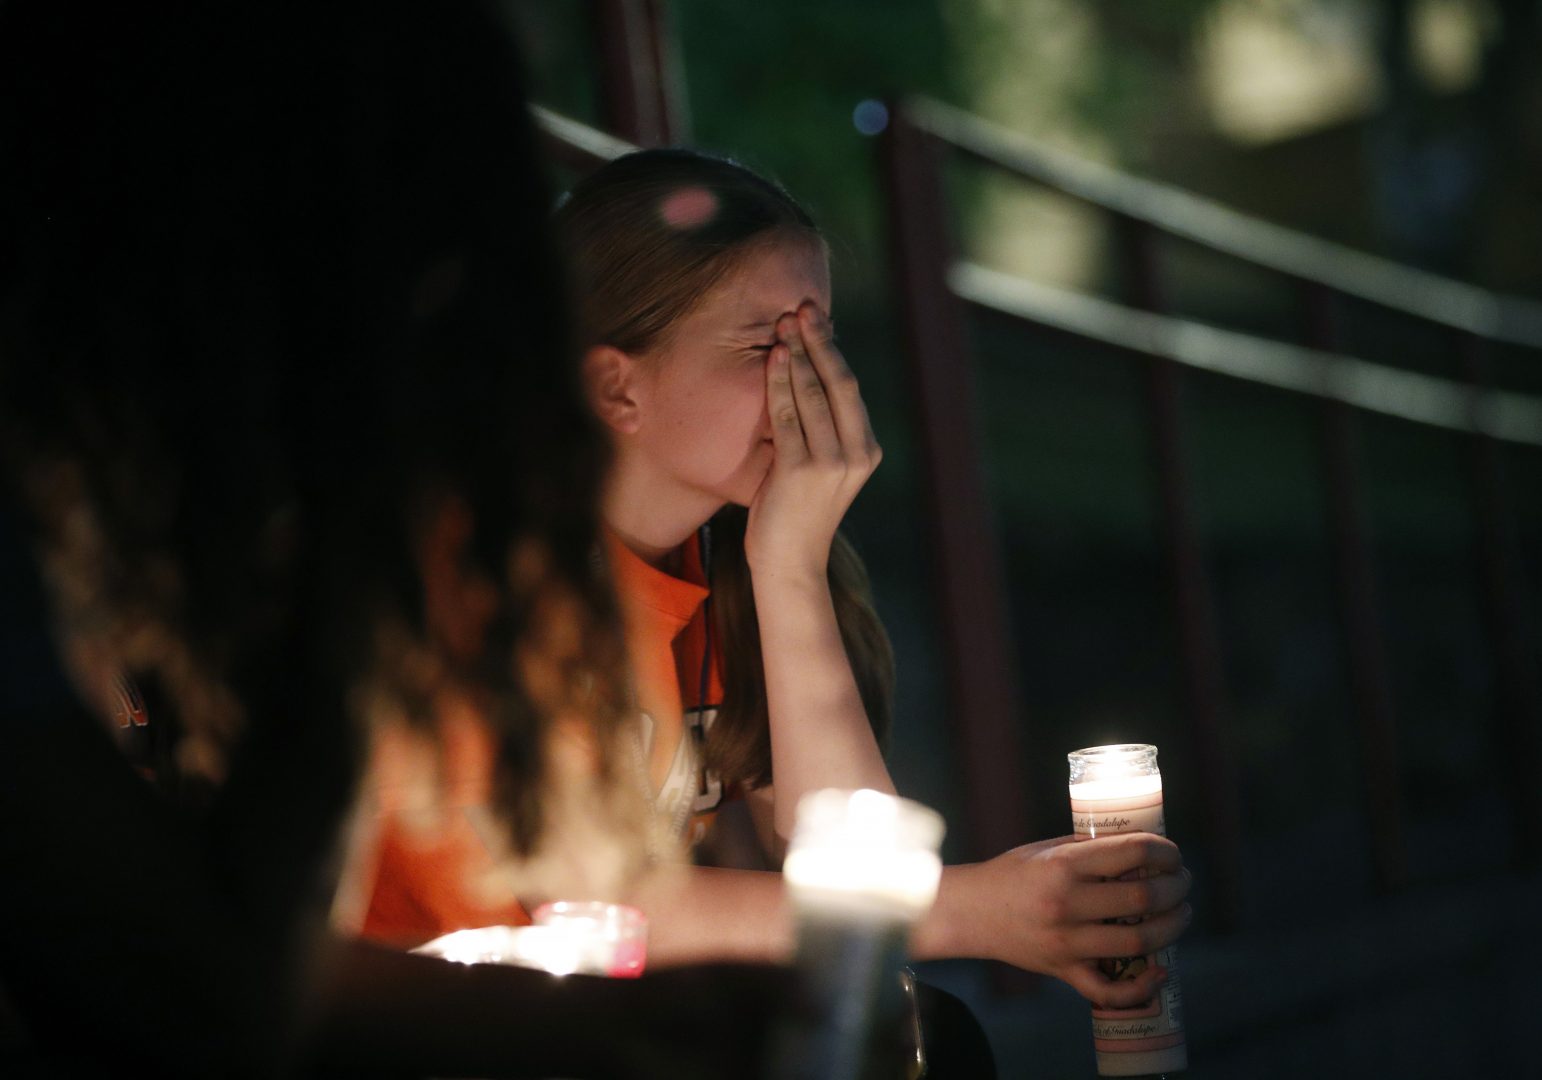 Sherie Gramlich reacts during a vigil for victims of a mass shooting that occurred earlier in the day at a shopping complex Saturday, Aug. 3, 2019, in El Paso, Texas.